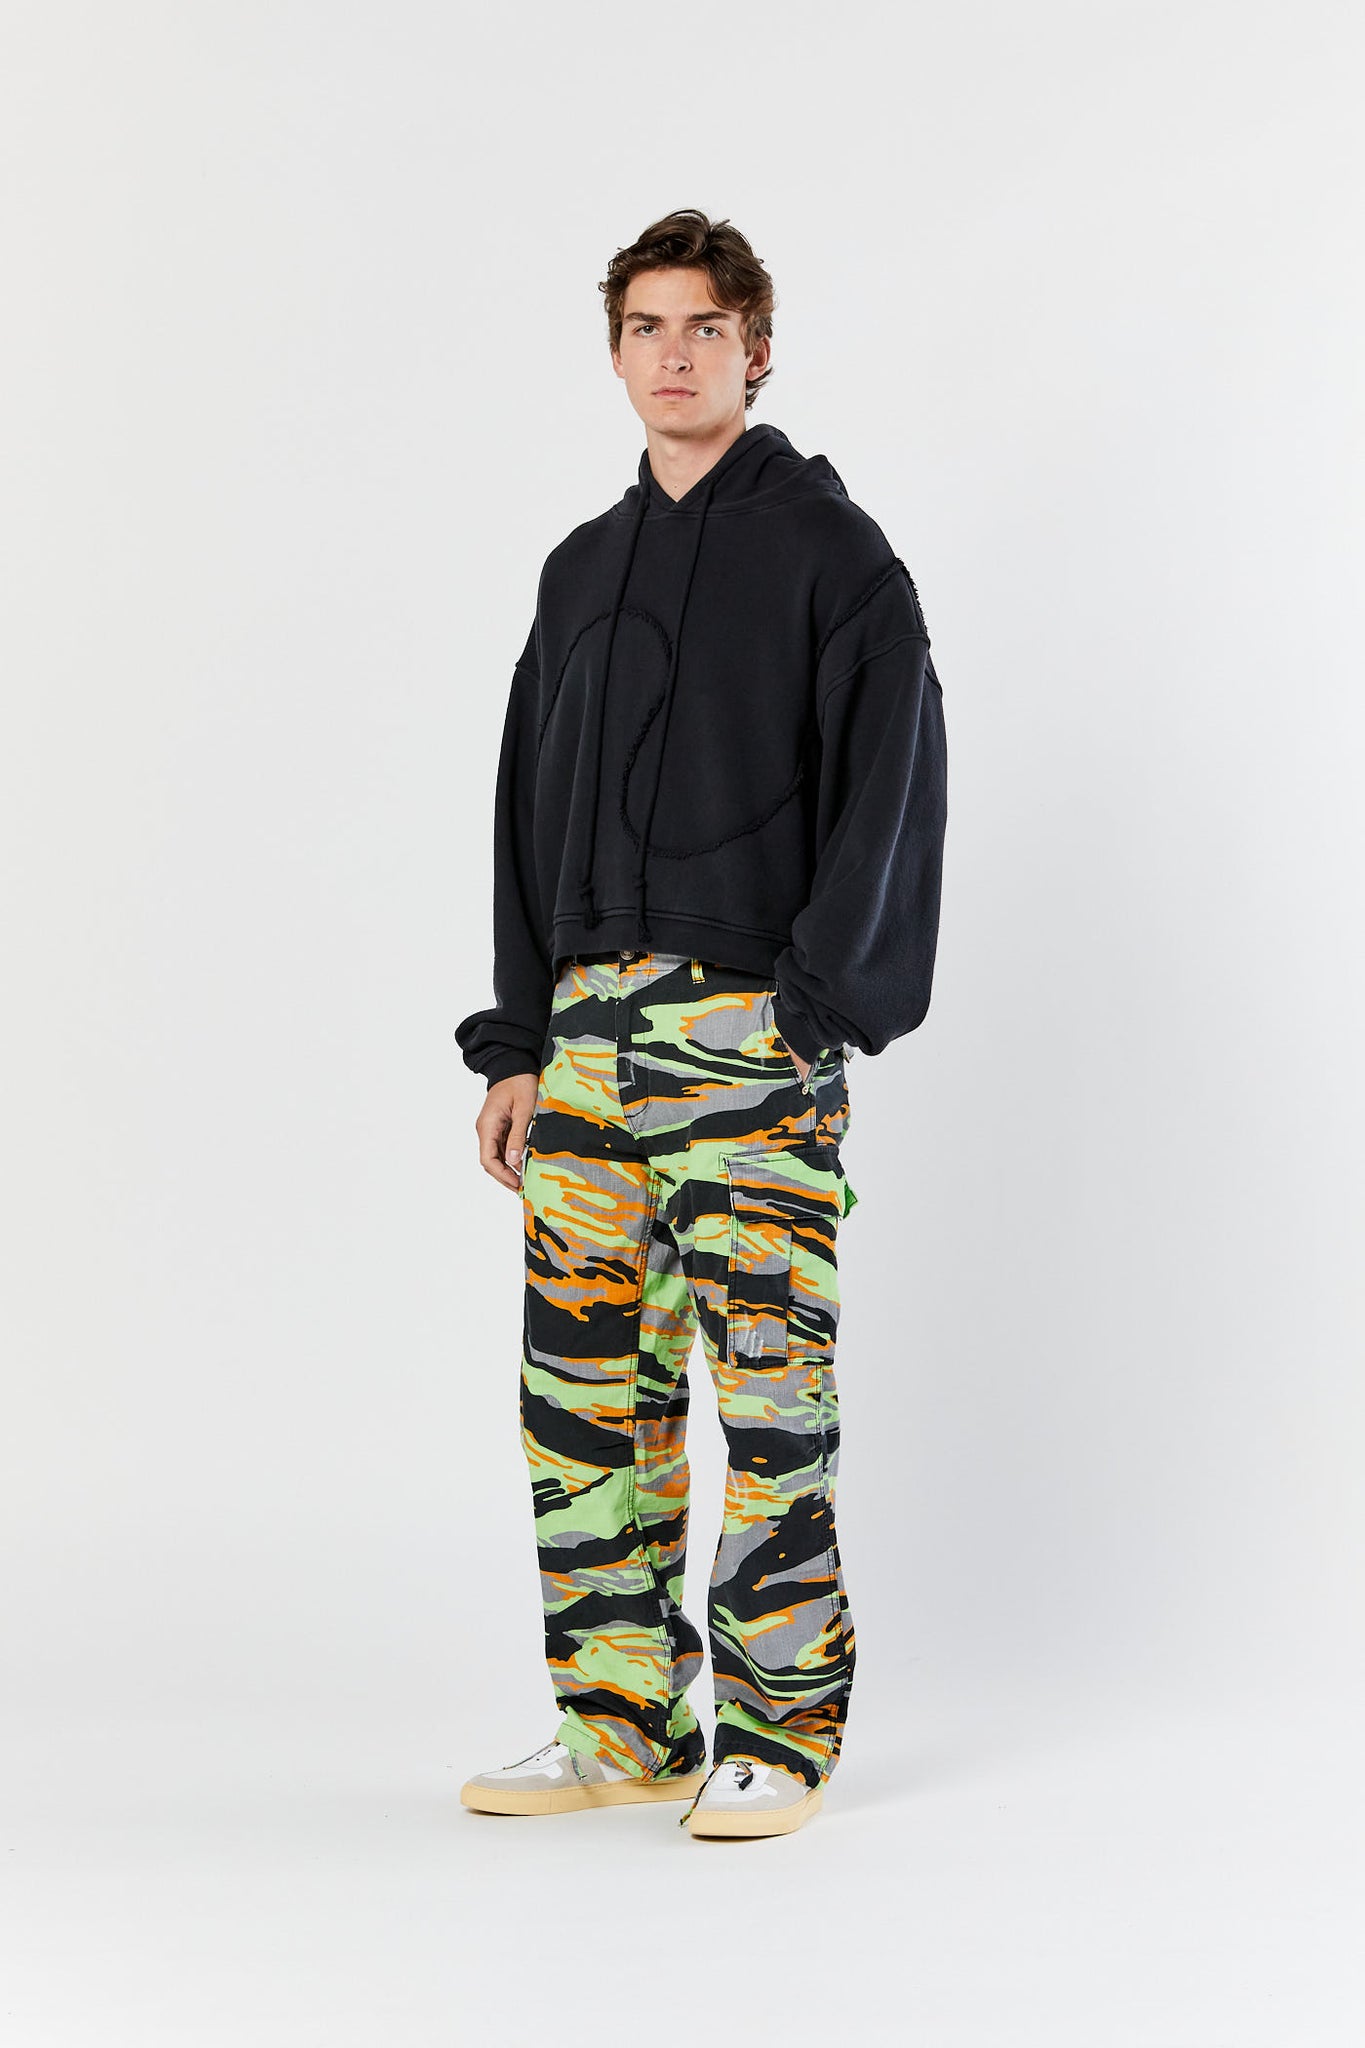 Green Camouflage Unisex Printed Cargo Pants